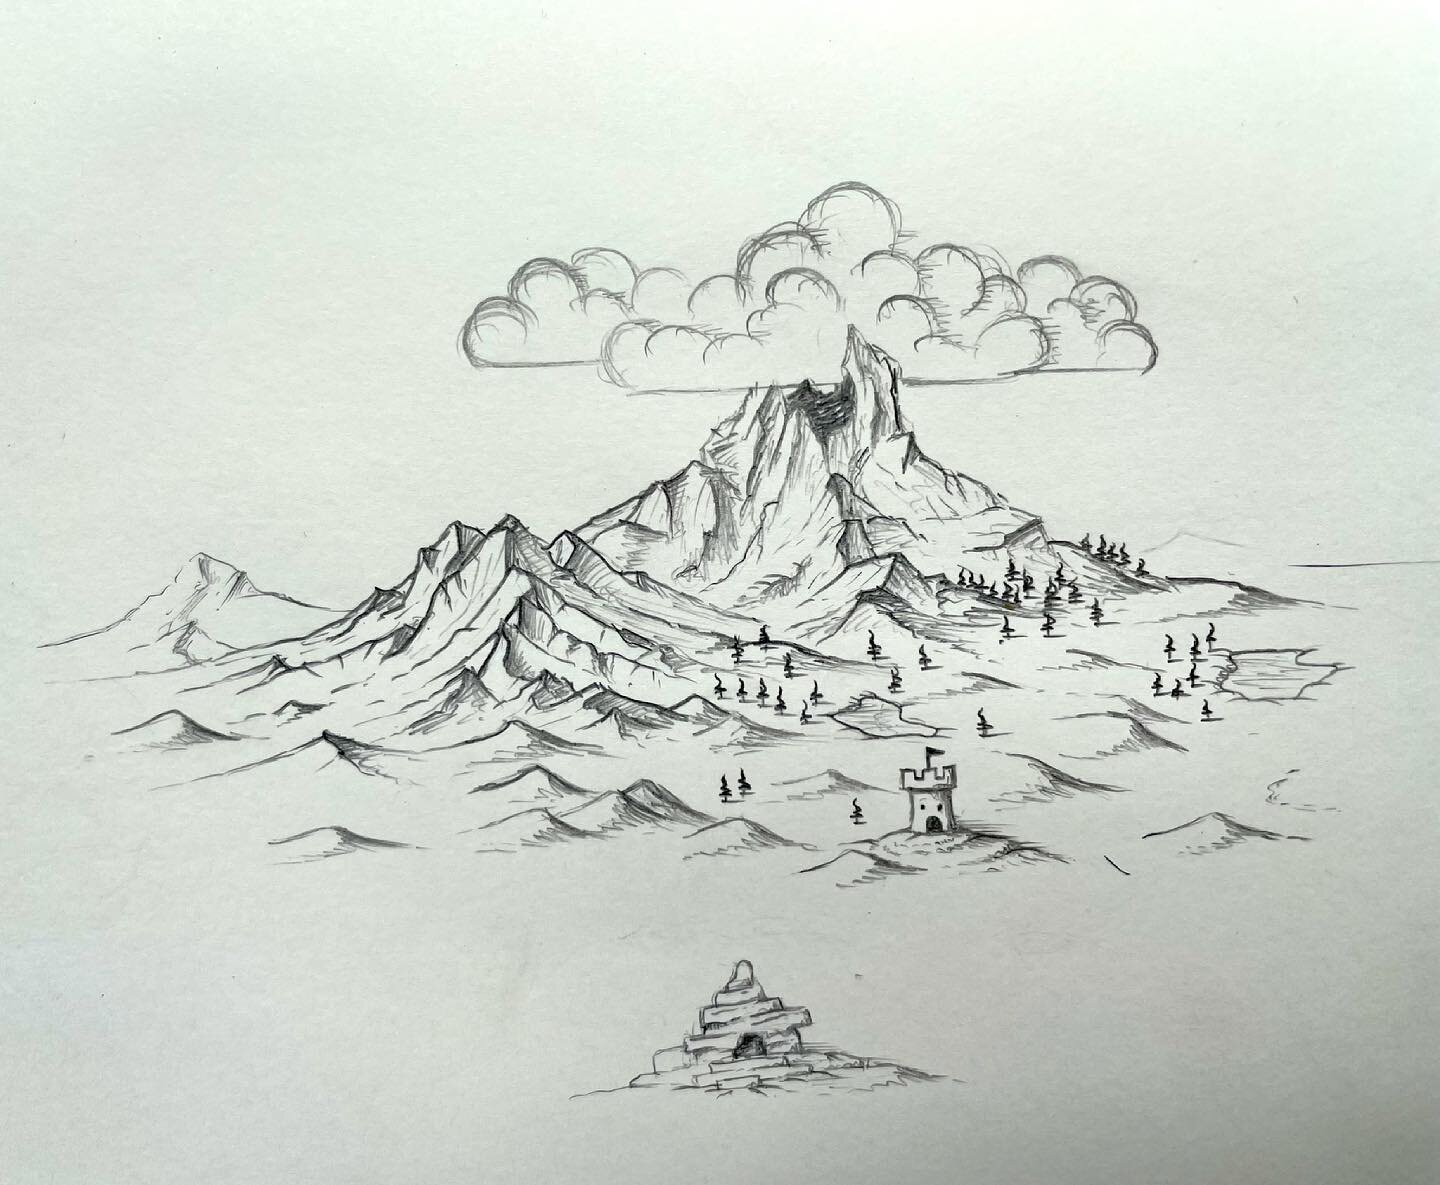 A bit more mountain sketching. You can see the whole process as a timelapse on my youtube channel (link in bio)

#map #mapmaking #cartography #fantasycartography #fantasymap #rpg #rpgmap #tabletop #dnd #dndmap #dungeonsanddragons #sketching #mountain